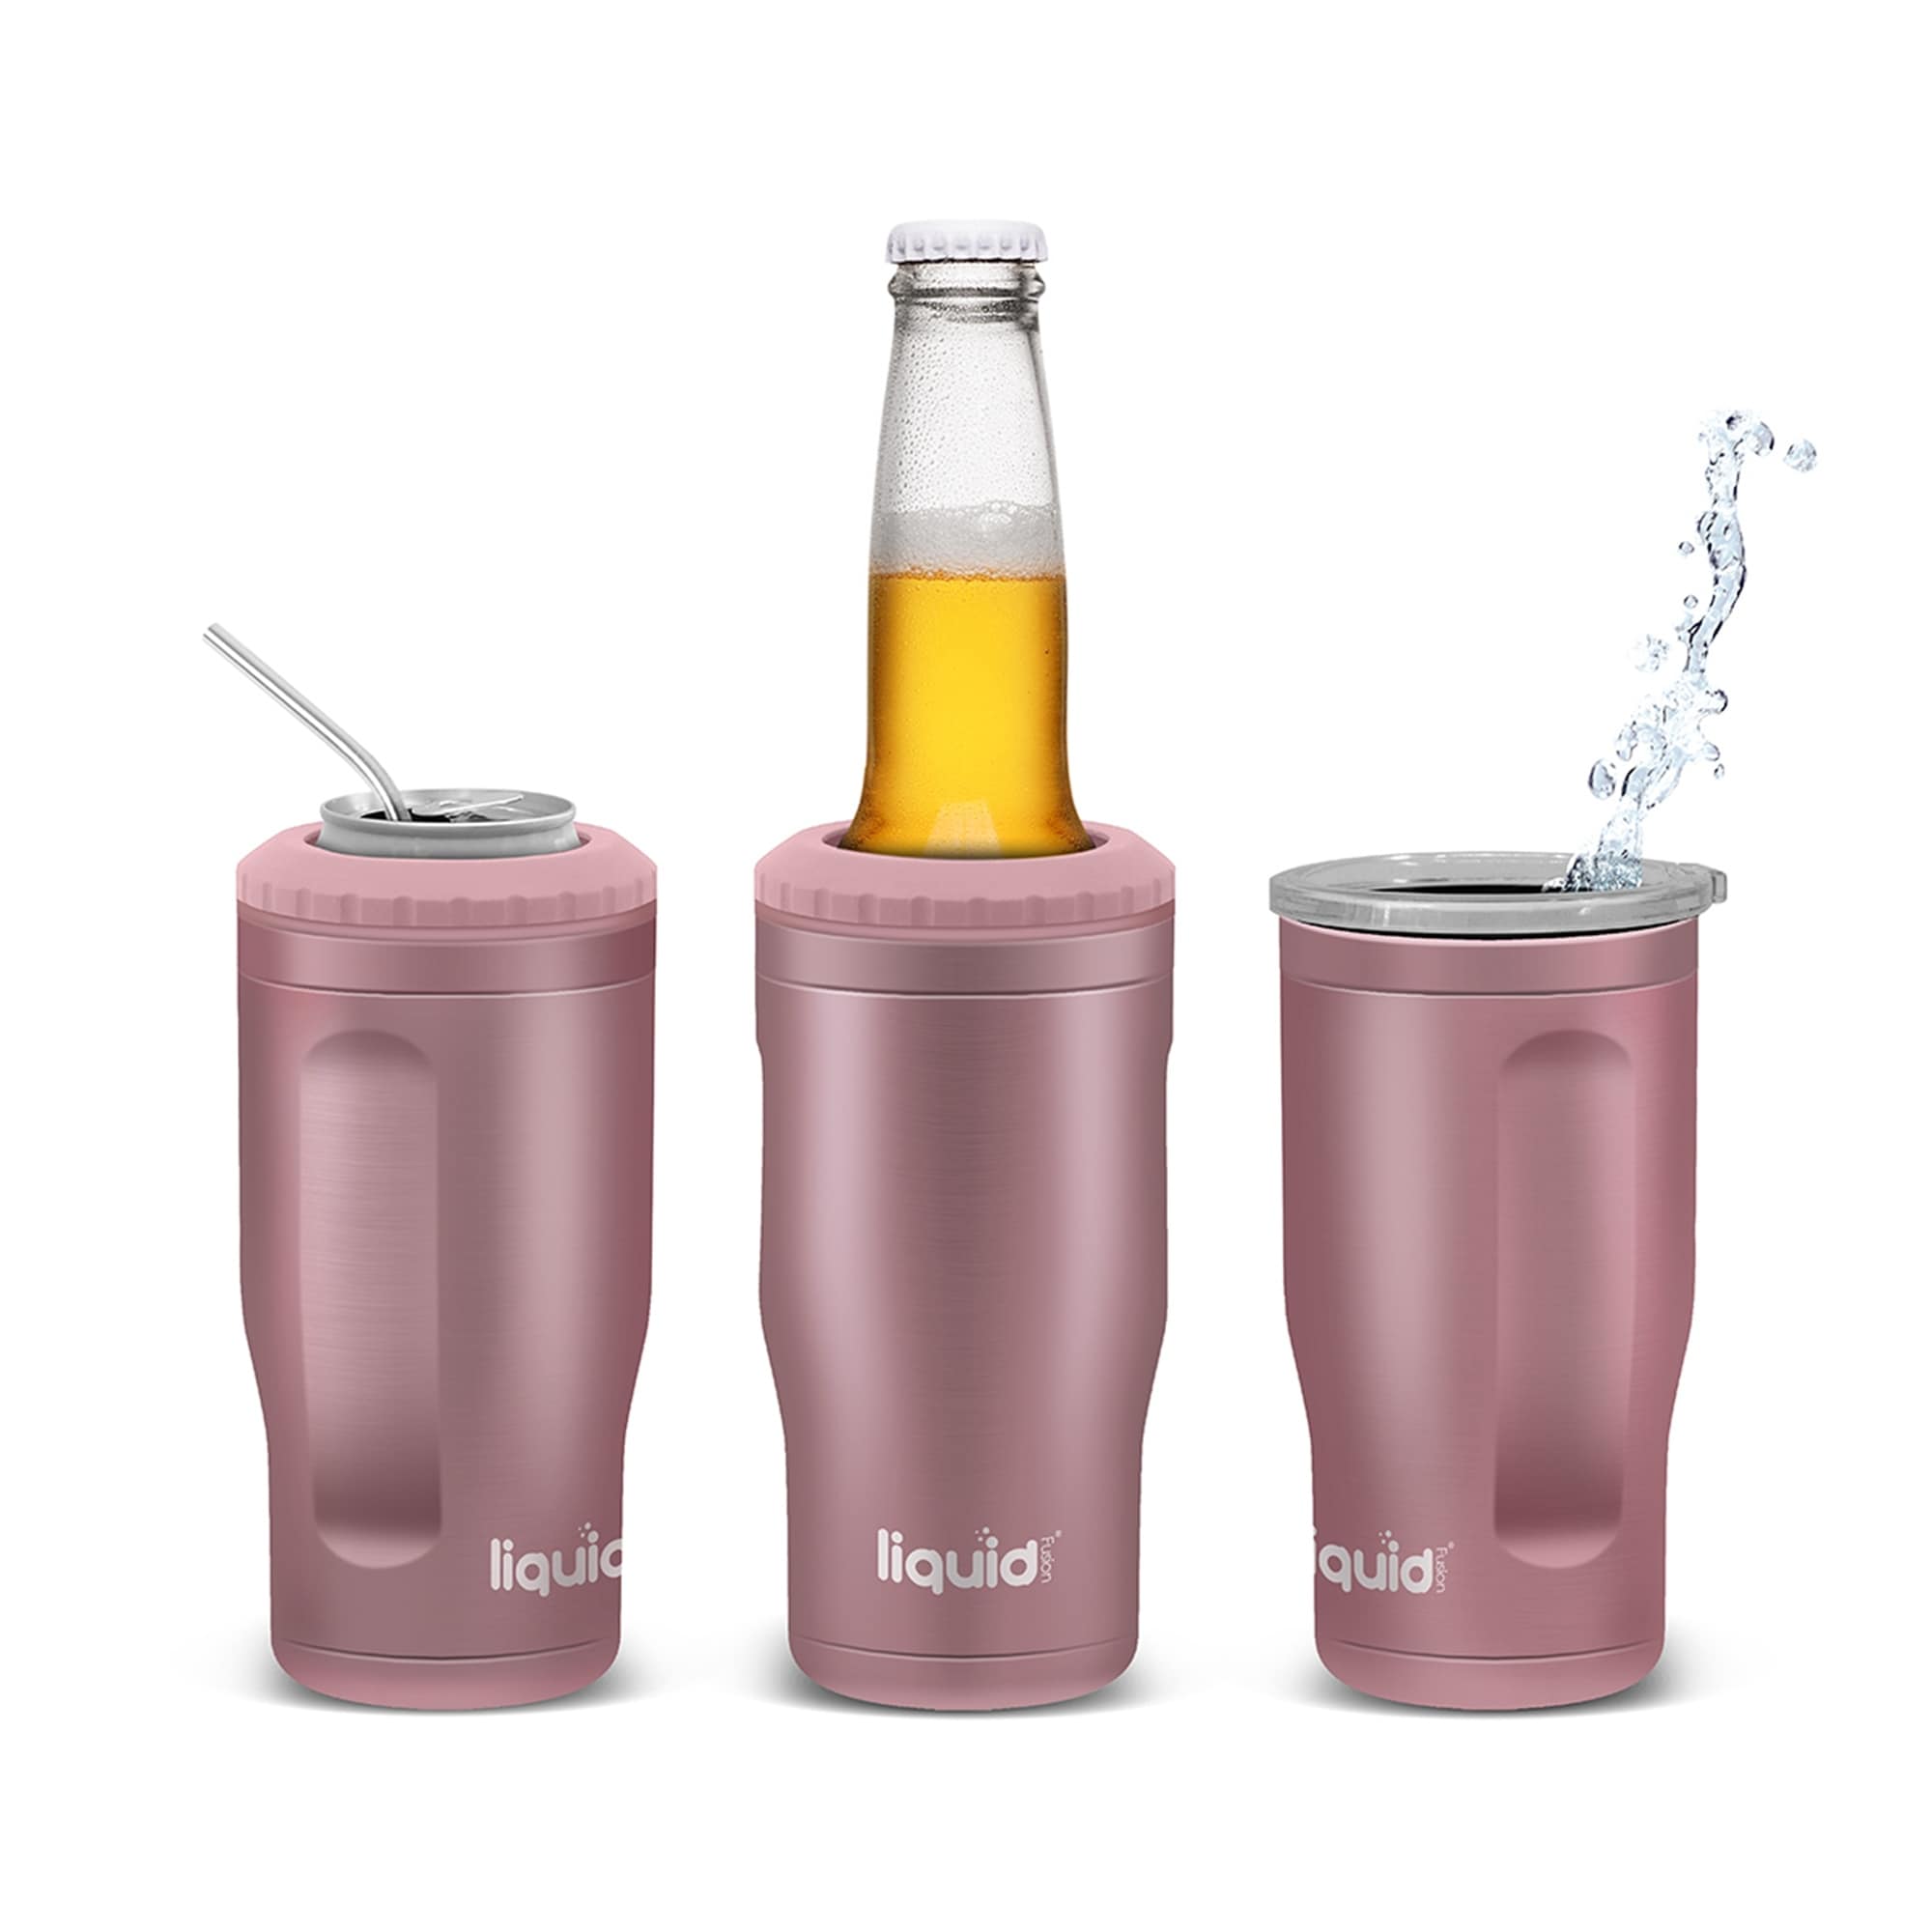 https://ak1.ostkcdn.com/images/products/is/images/direct/c30ede374ad238f077d069f8e04c23d9ab290ce8/4-n-1-Icy-Bev-Kooler%2C-Rose-Gold.jpg